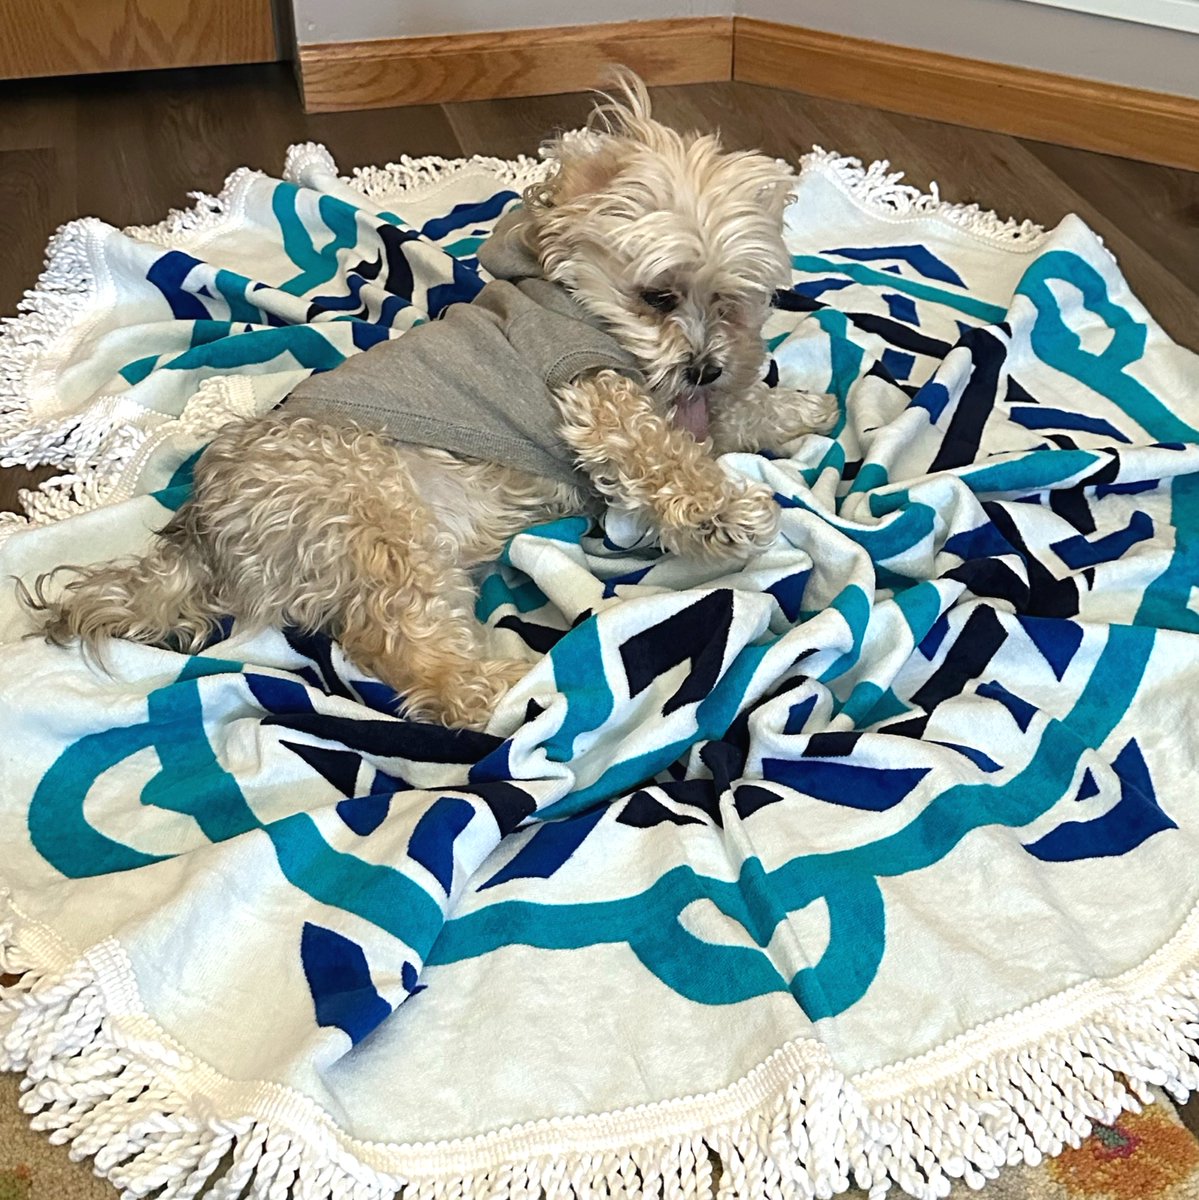 HAPPY #NATIONALPETDAY! 🐾 Want YOUR pet to look this adorable and relaxed? For a limited time, get an IDT mandala towel free with orders over $2500. Restrictions apply. Learn more here: idtb.io/kuu4hl